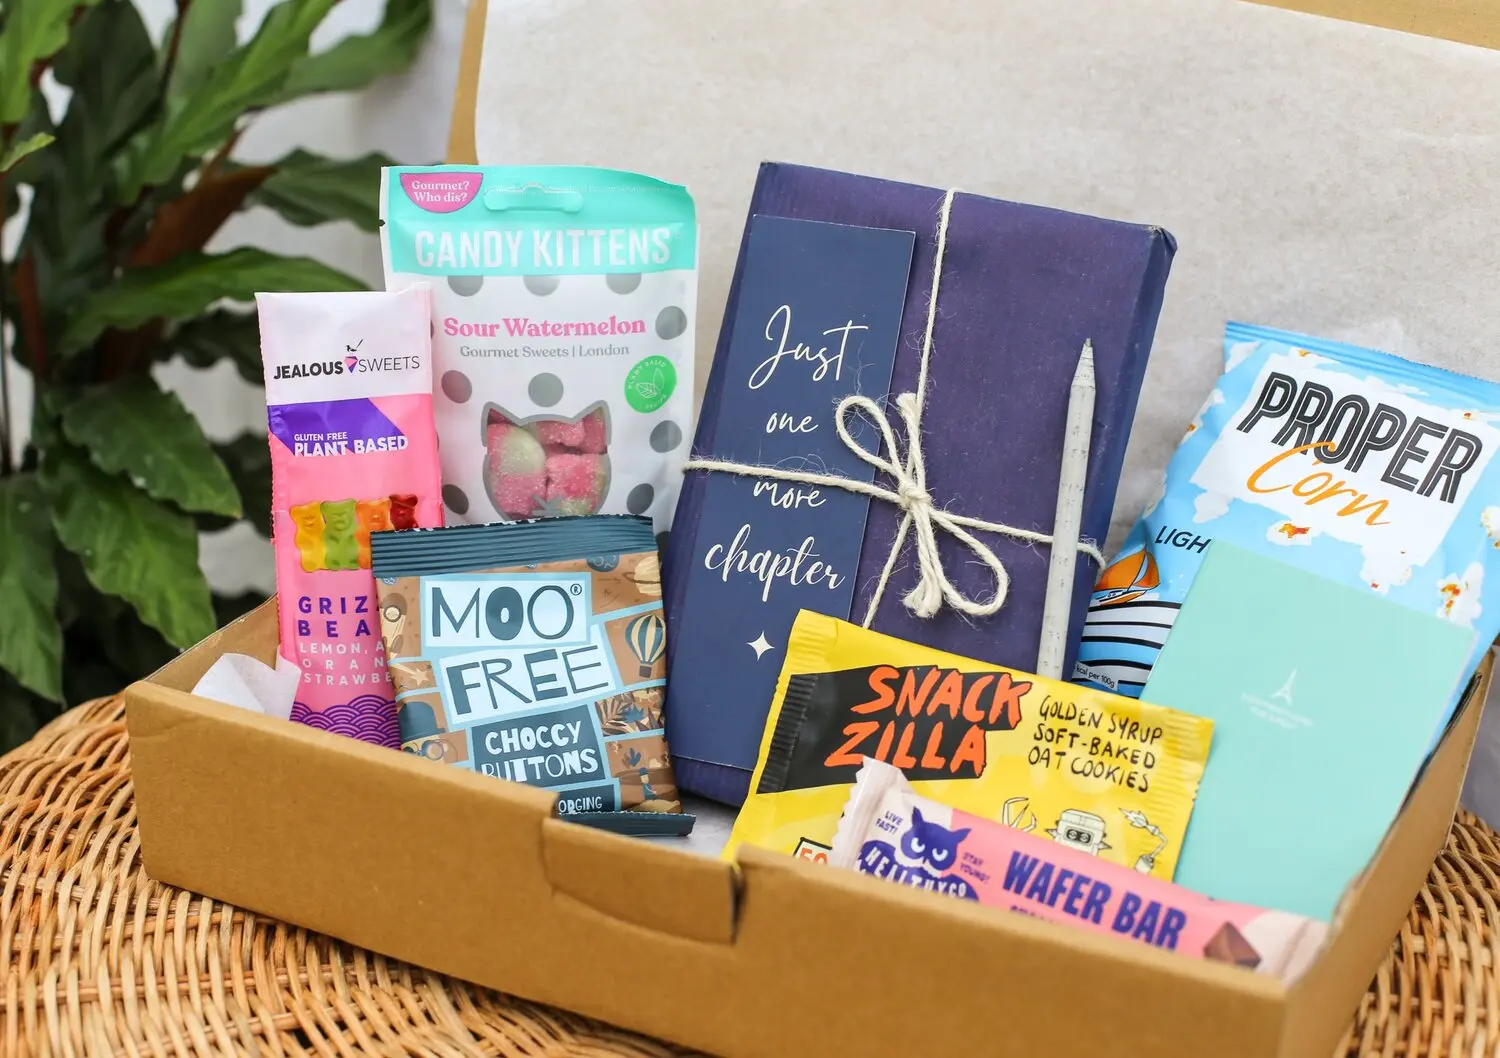 Ethical gifts & mystery book boxes